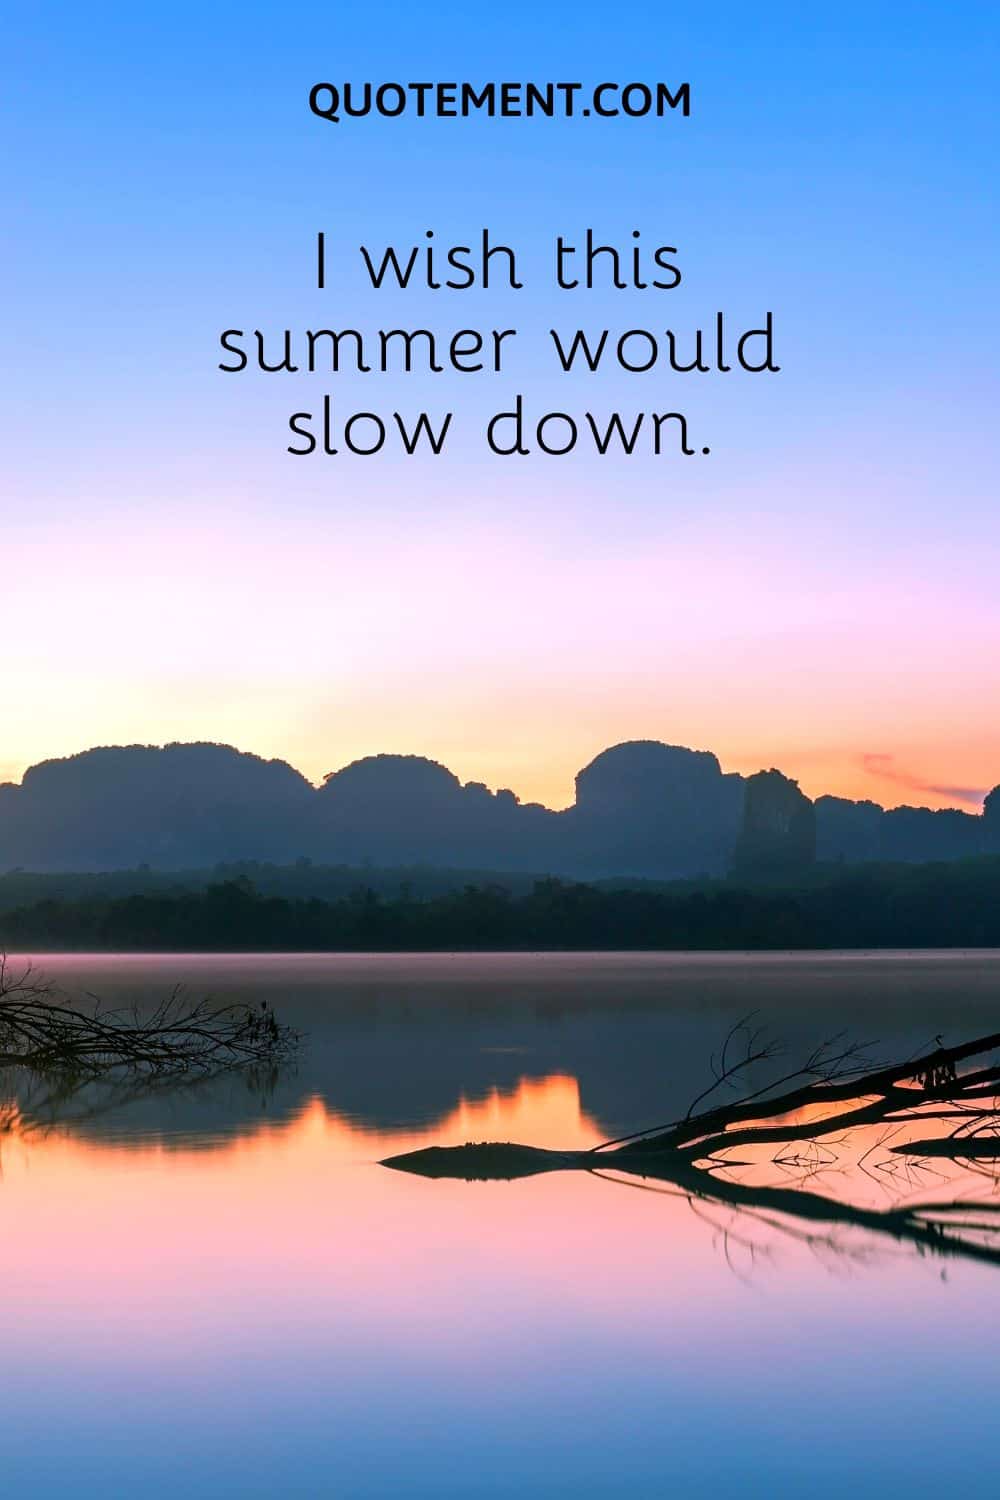 I wish this summer would slow down.